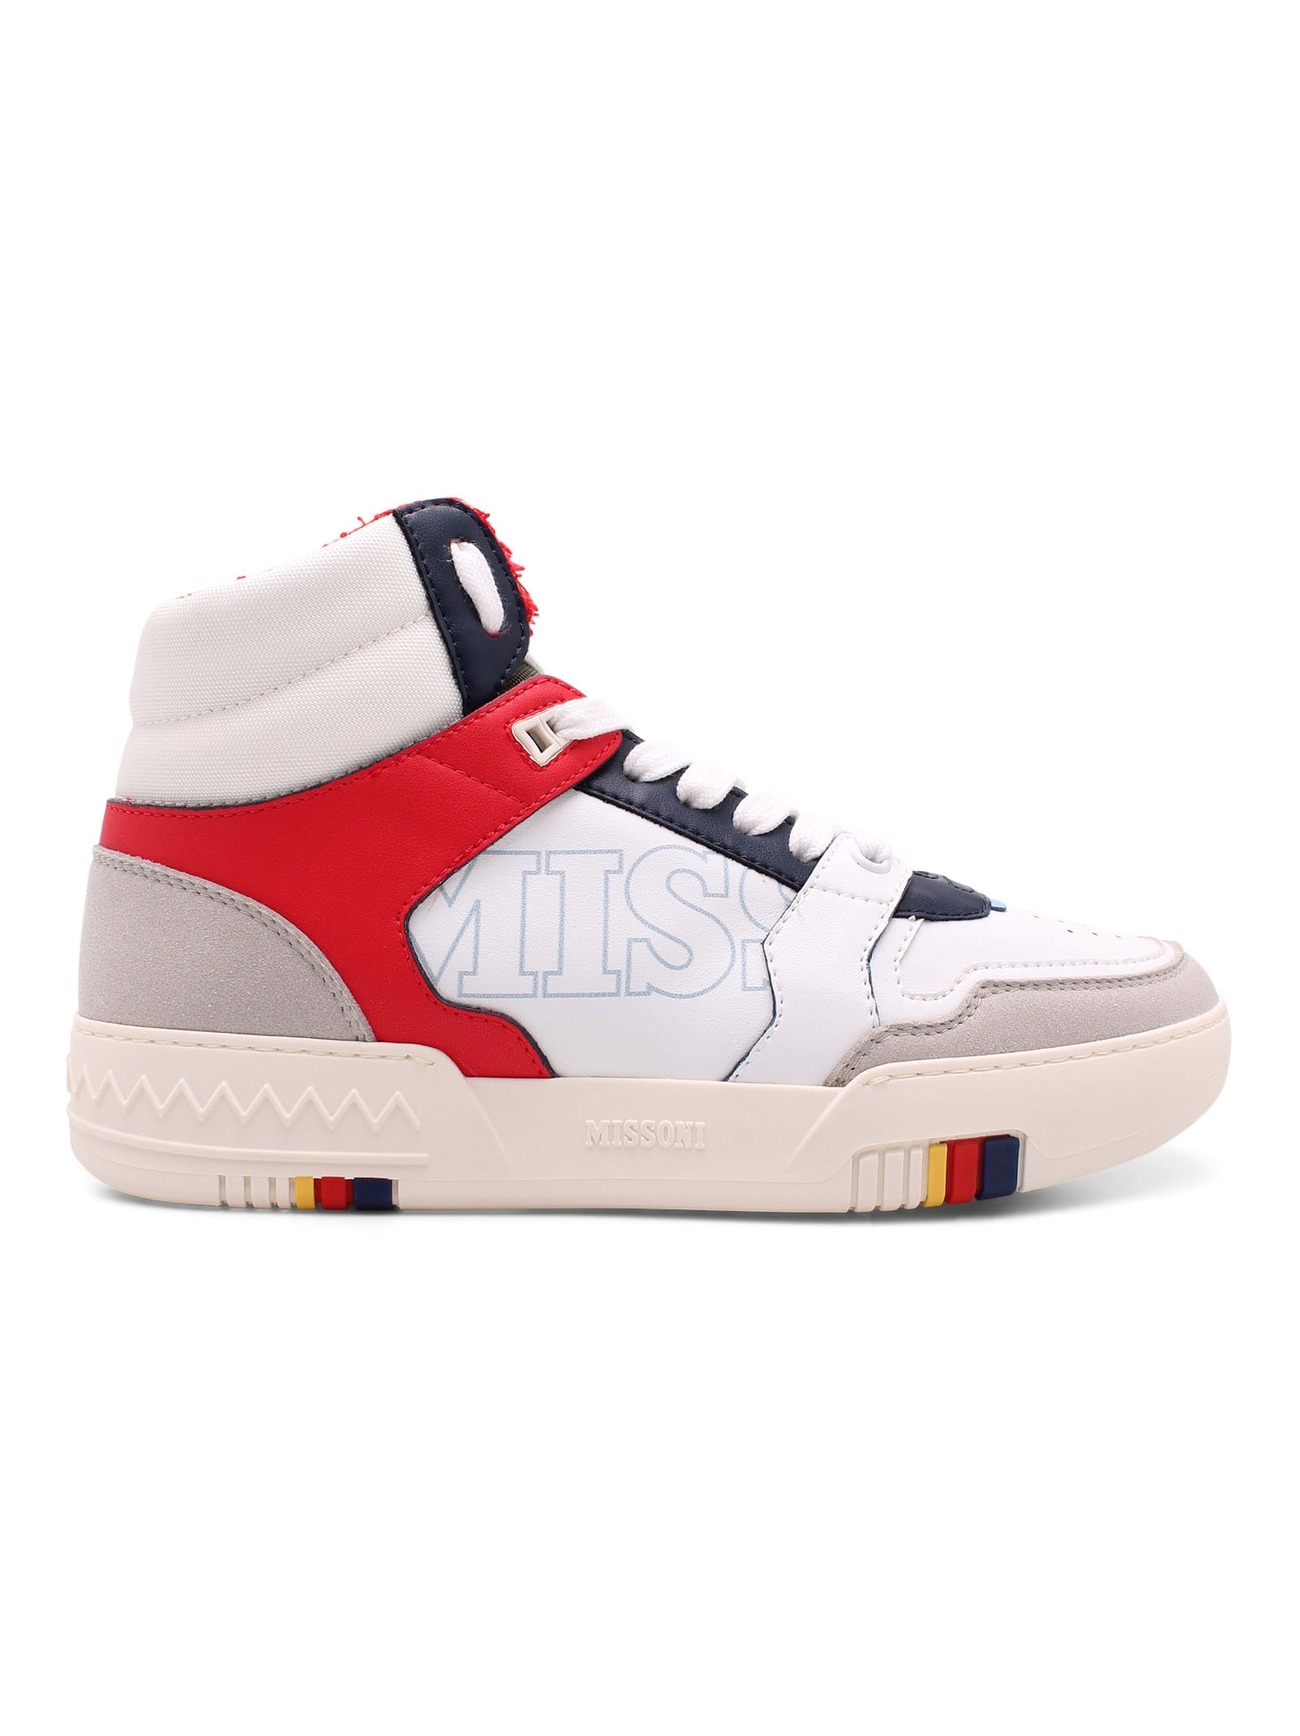 Missoni Ankle Paneled Leather Sneakers in red / white